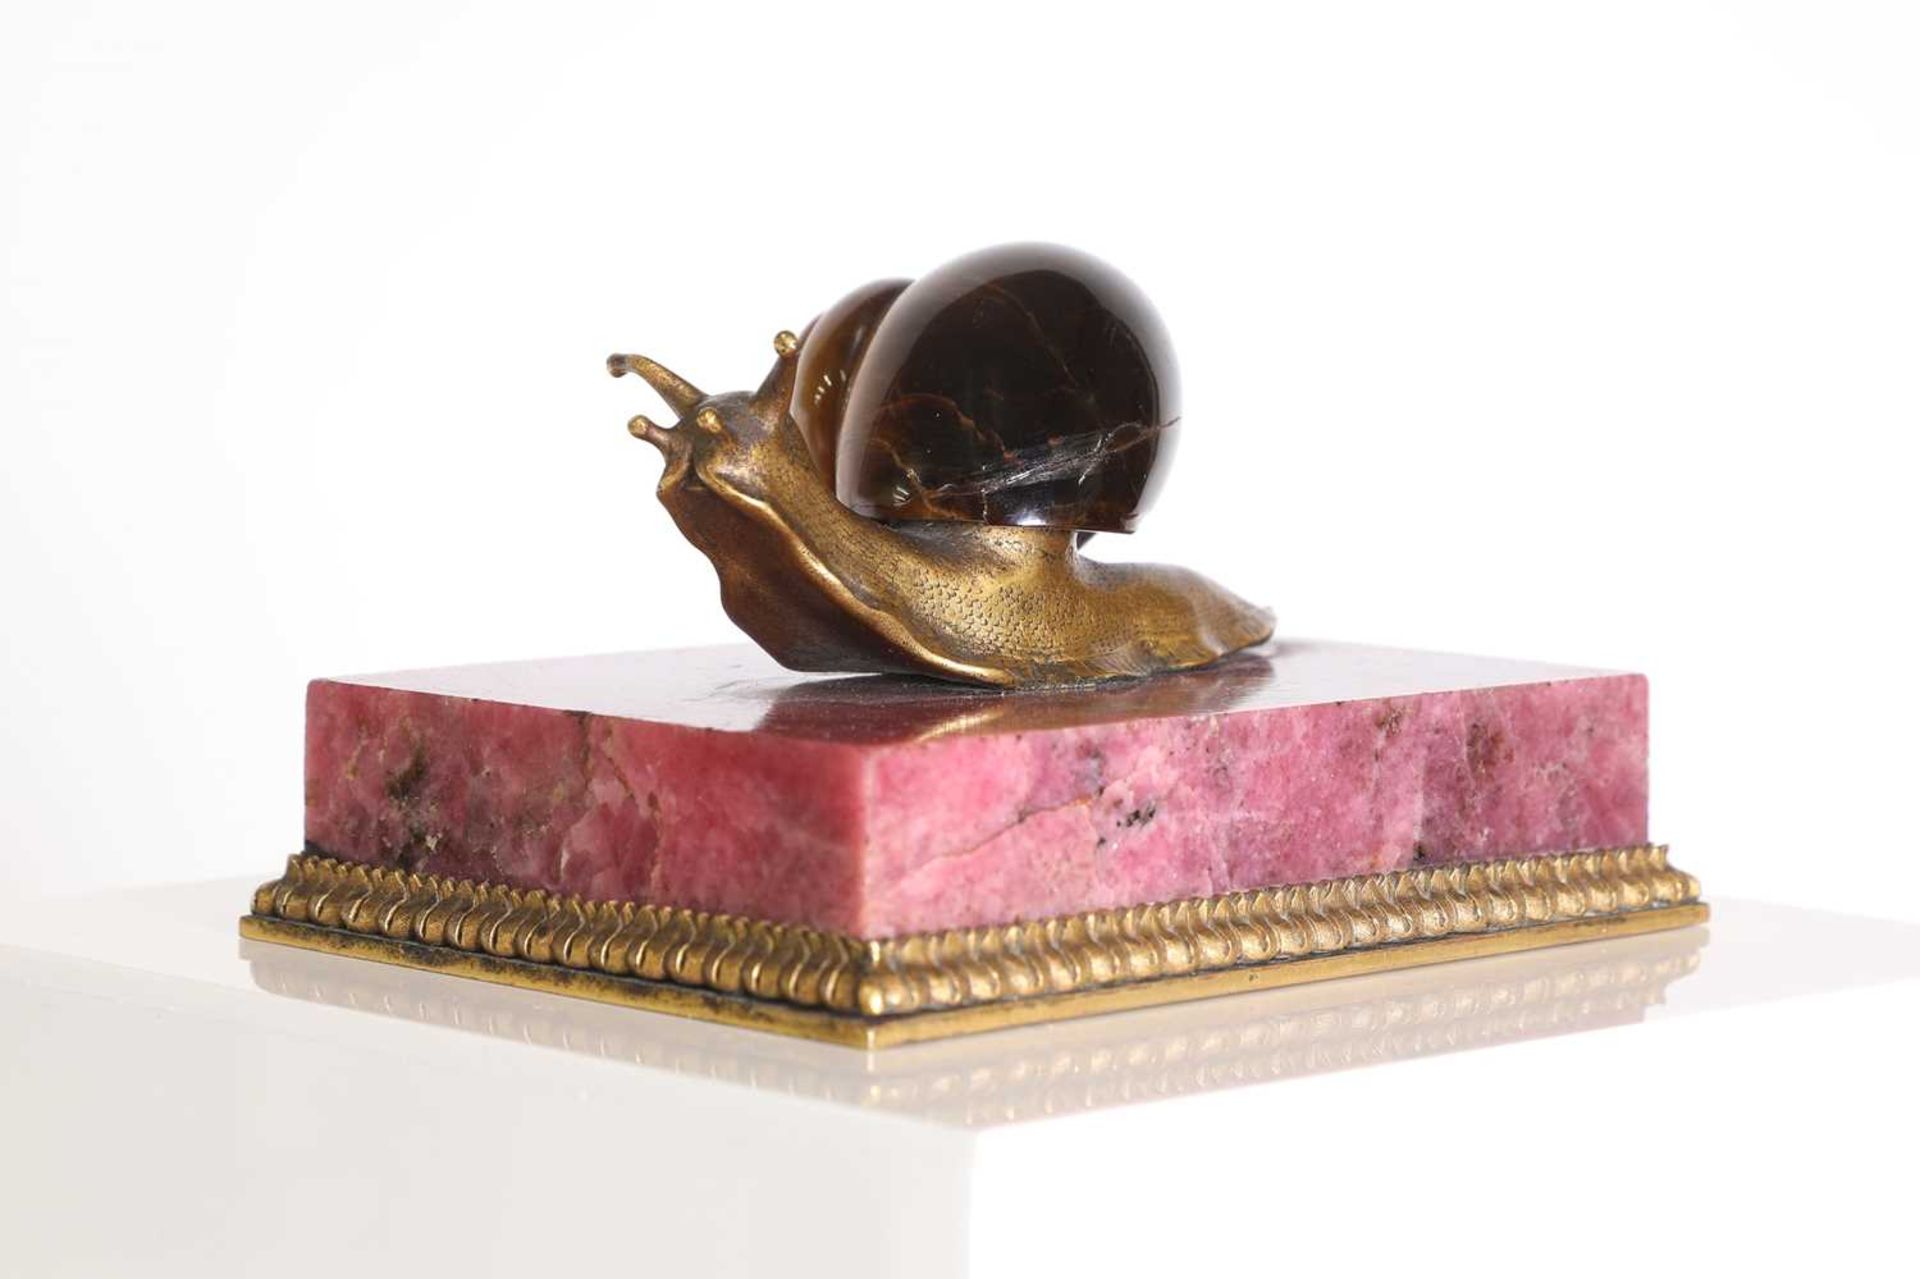 A tiger's eye and ormolu snail, - Image 5 of 25